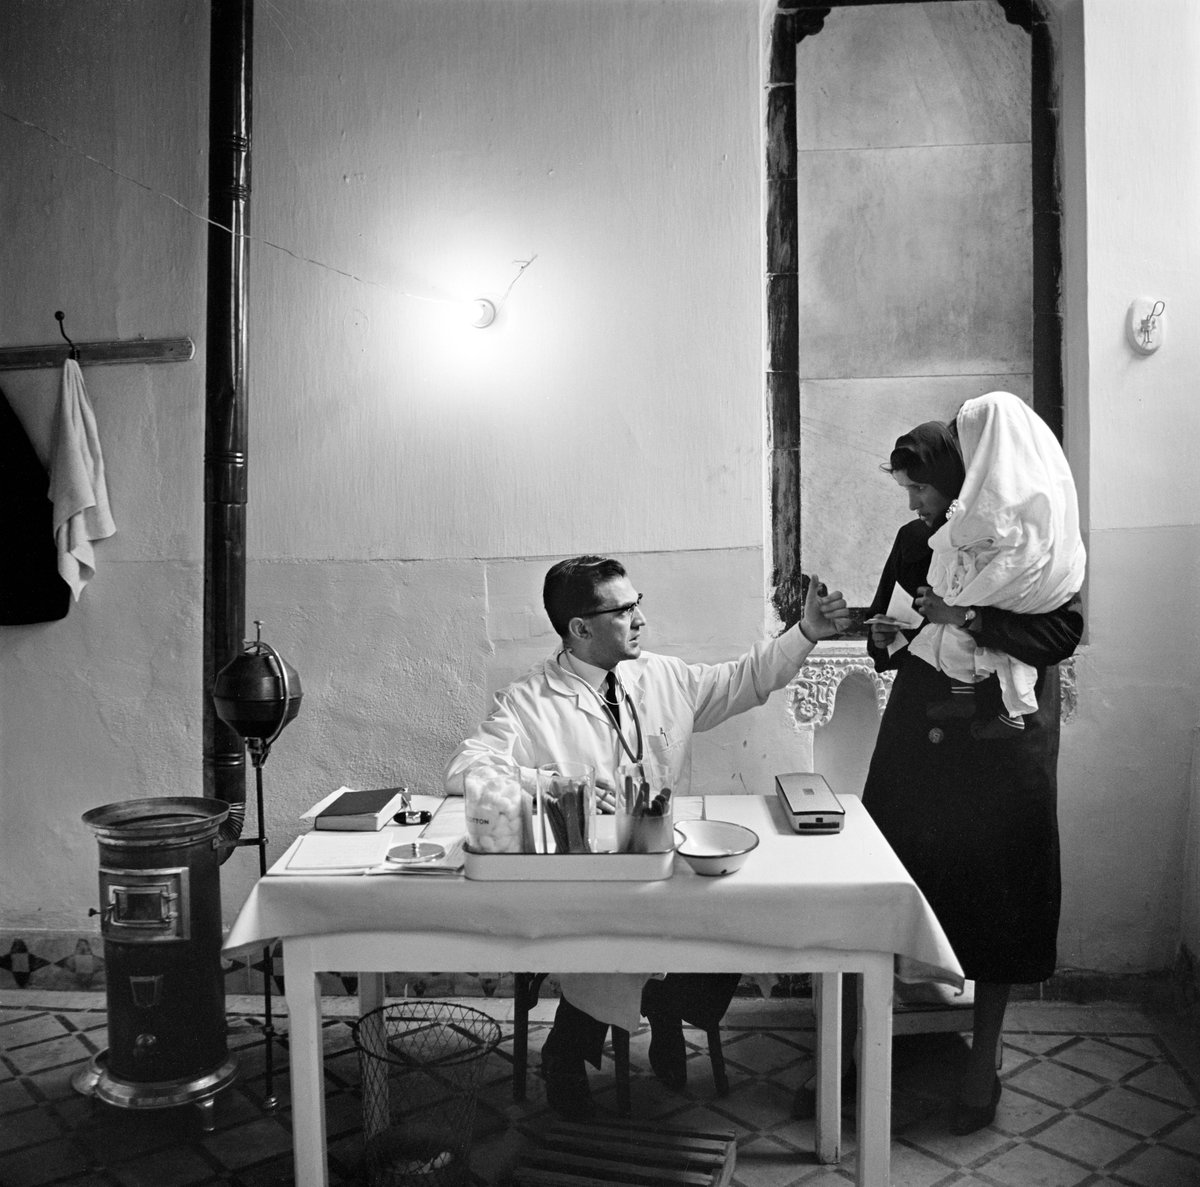 📸 Throwback Thursday 📸

A doctor gives medical advice to a patient in Damascus, circa 1957.

#UNRWA is committed to providing vital health services to #PalestineRefugees in #Syria📍

Access the UNRWA archive 📷👇unrwa.photoshelter.com/index

#UNRWAworks #forPalestineRefugees